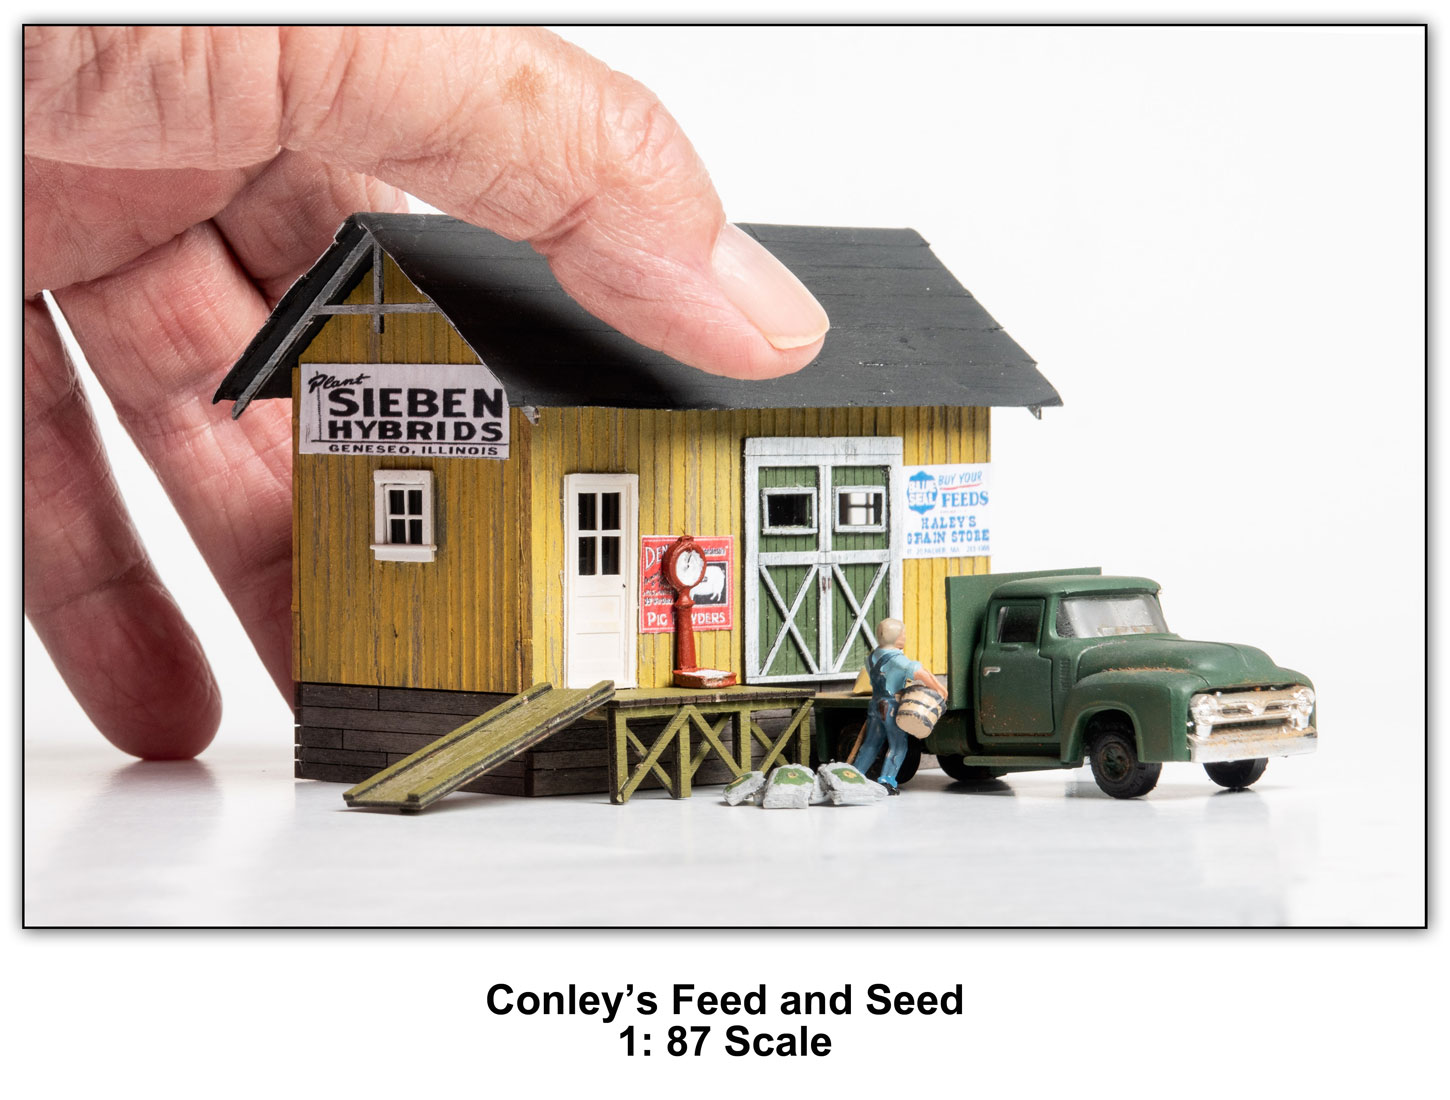 Conleys Feed and Seed Store 1:87 scale